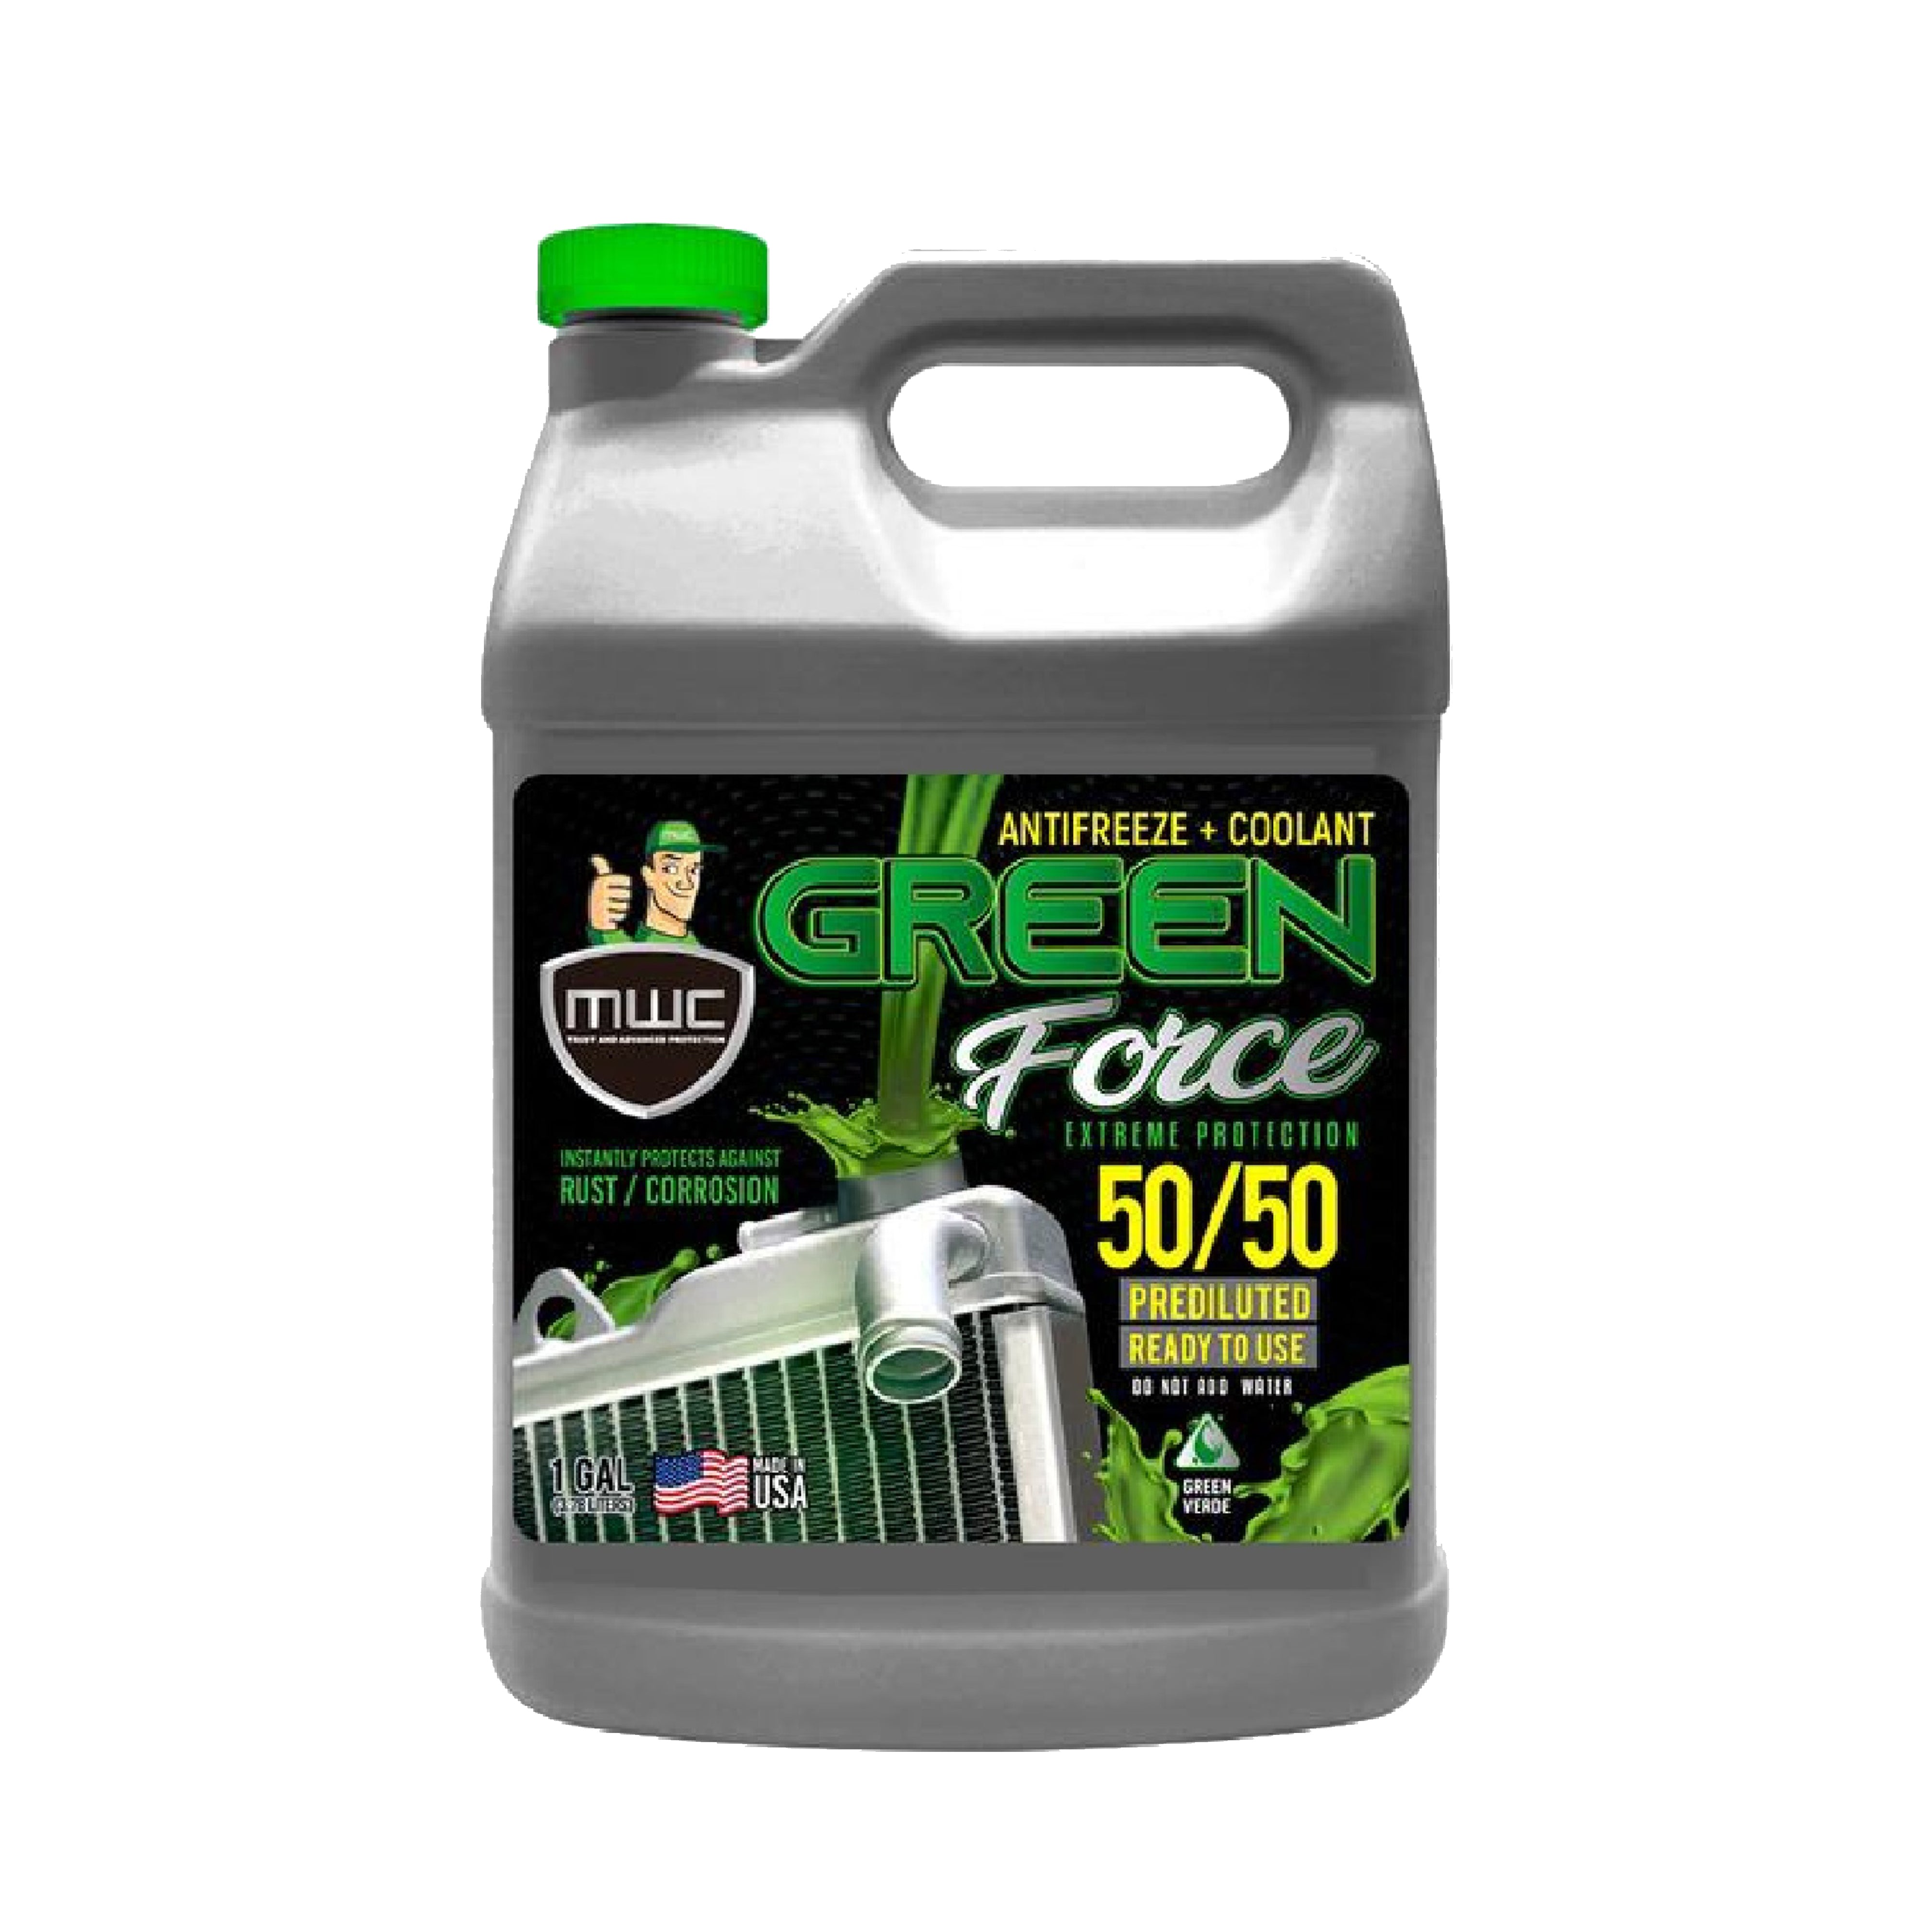 MWC Extreme Protection 50/50 Antifreeze & Coolant Green All-Season Defense Ready to use 1 Gal